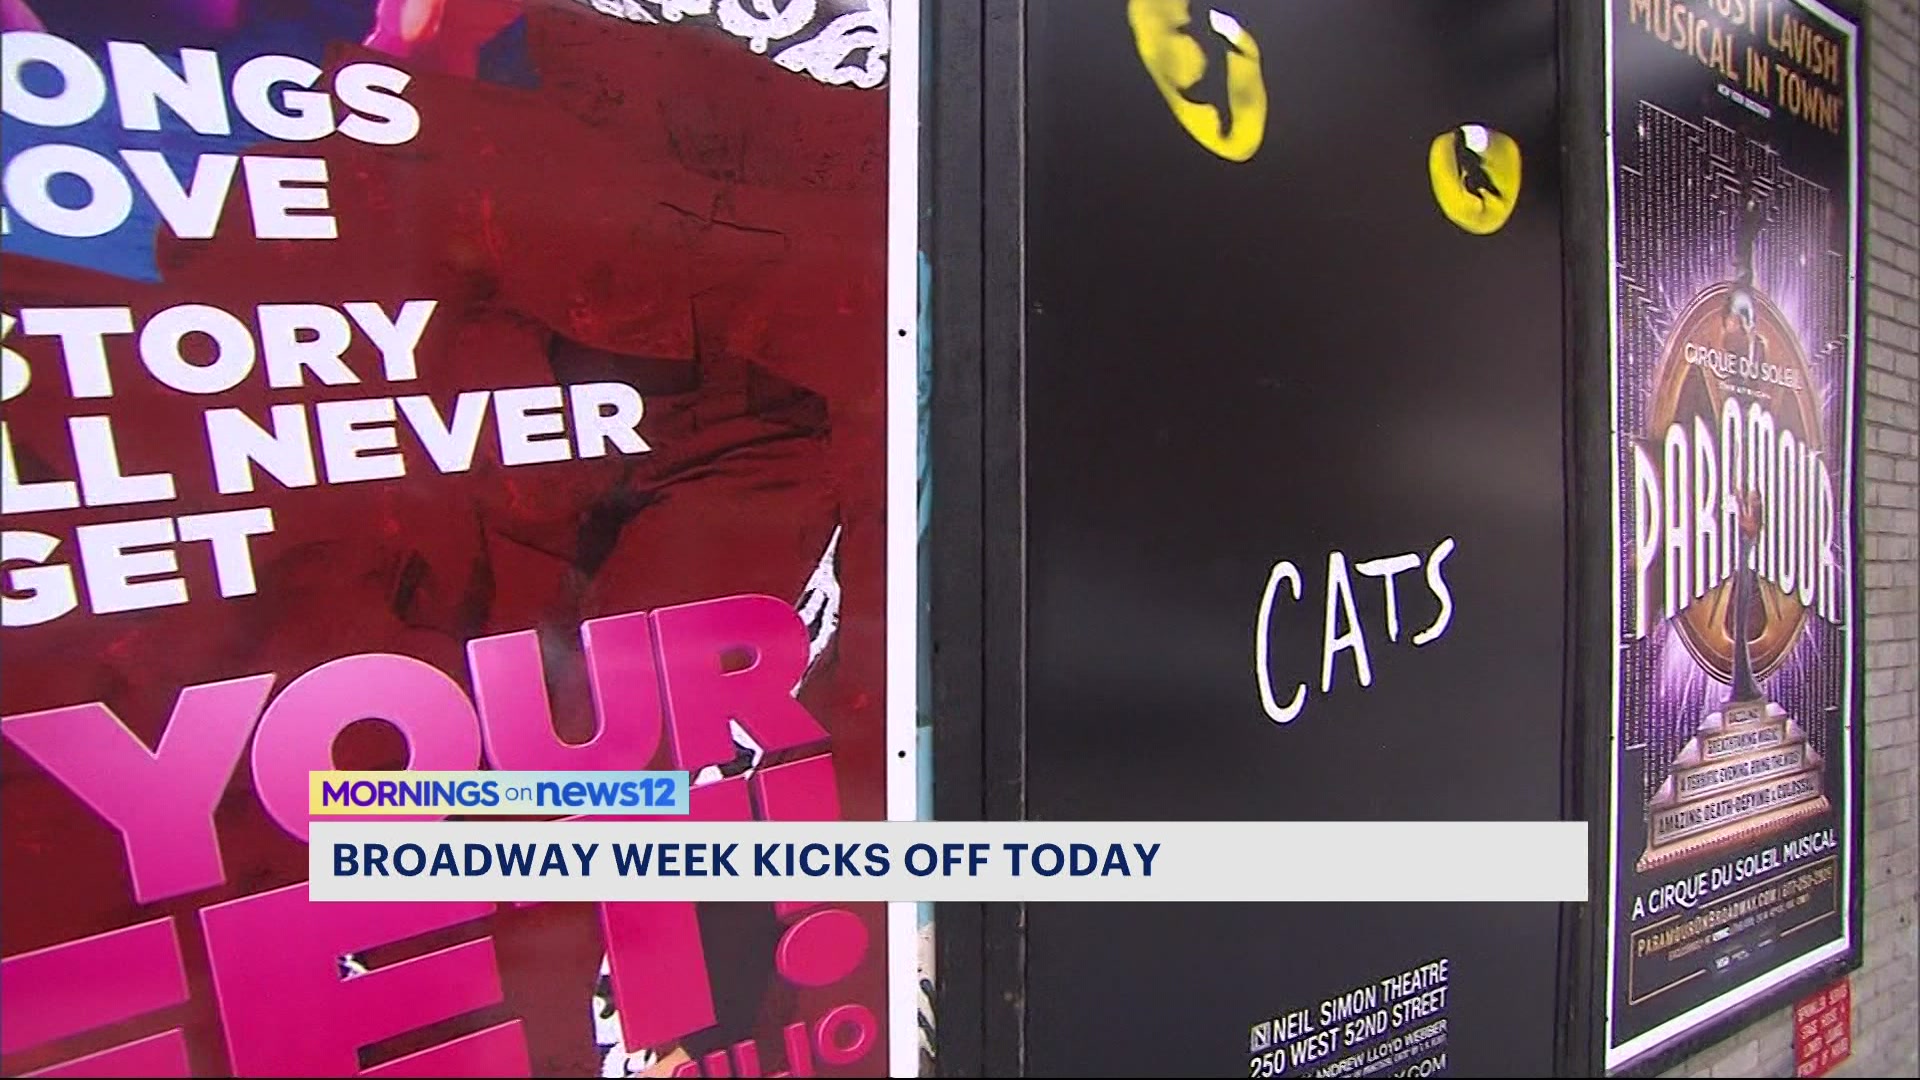 Broadway Week begins today with 2for1 ticket sales